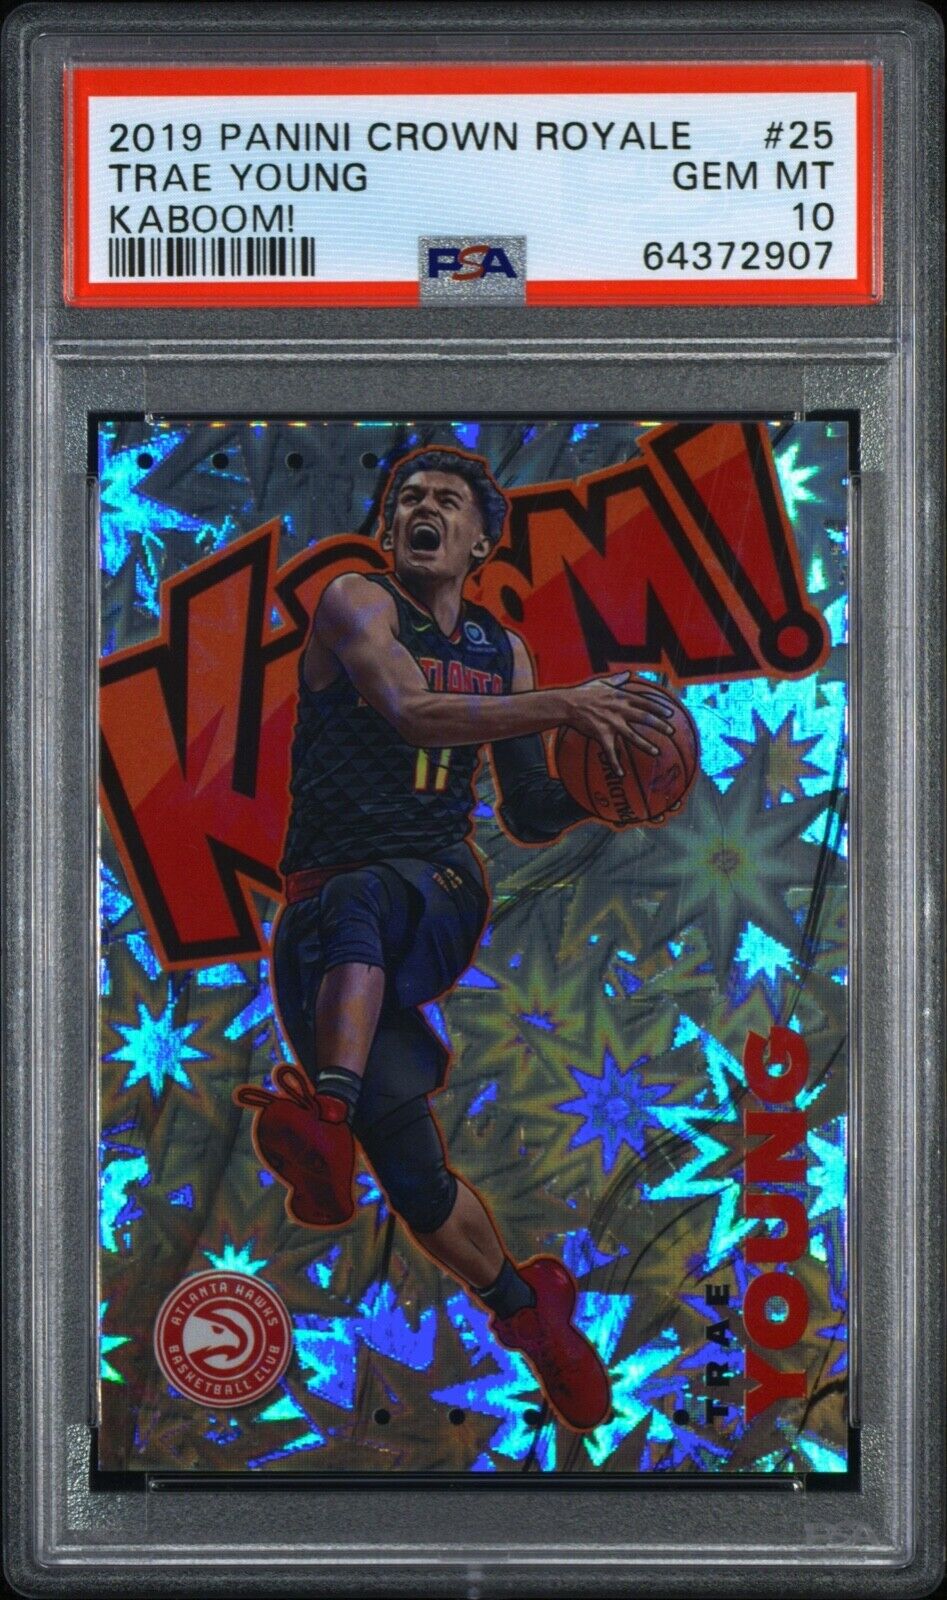 2019-20 Crown Royale Trae Young Kaboom! Kaboom SP Insert #25 PSA 10